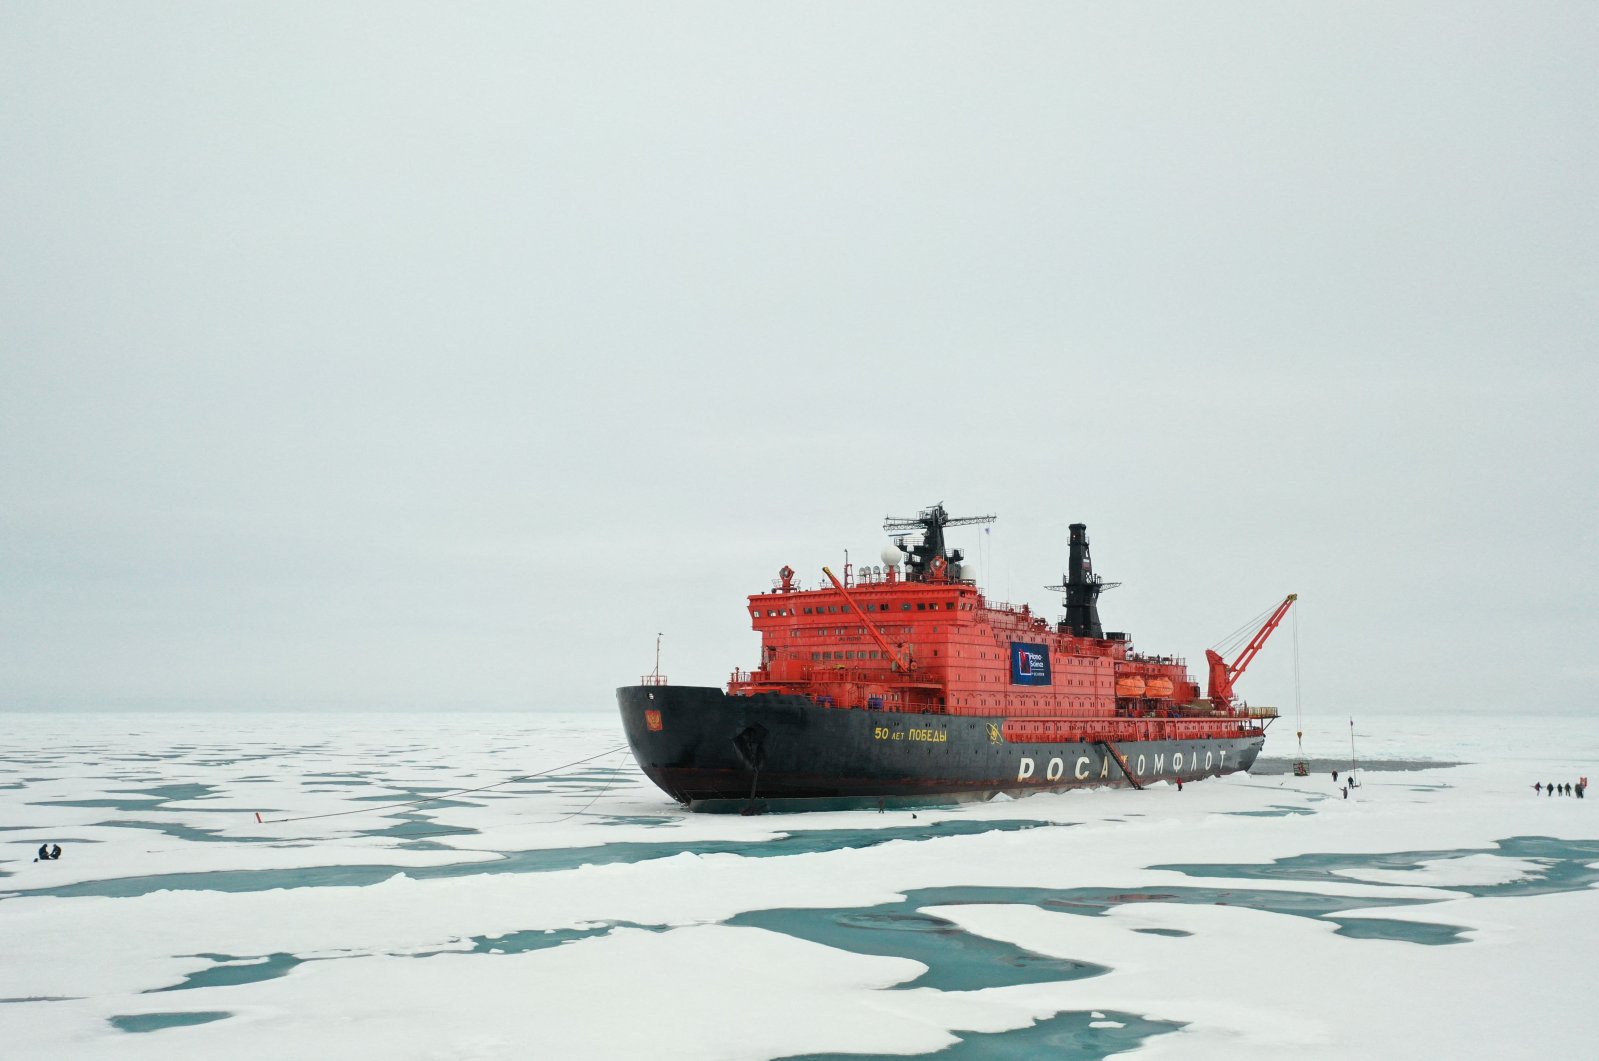 The Russian "50 Years of Victory" nuclear-powered icebreaker is seen at the North Pole, Aug. 18, 2021. (Ekaterina Anisimova / AFP)